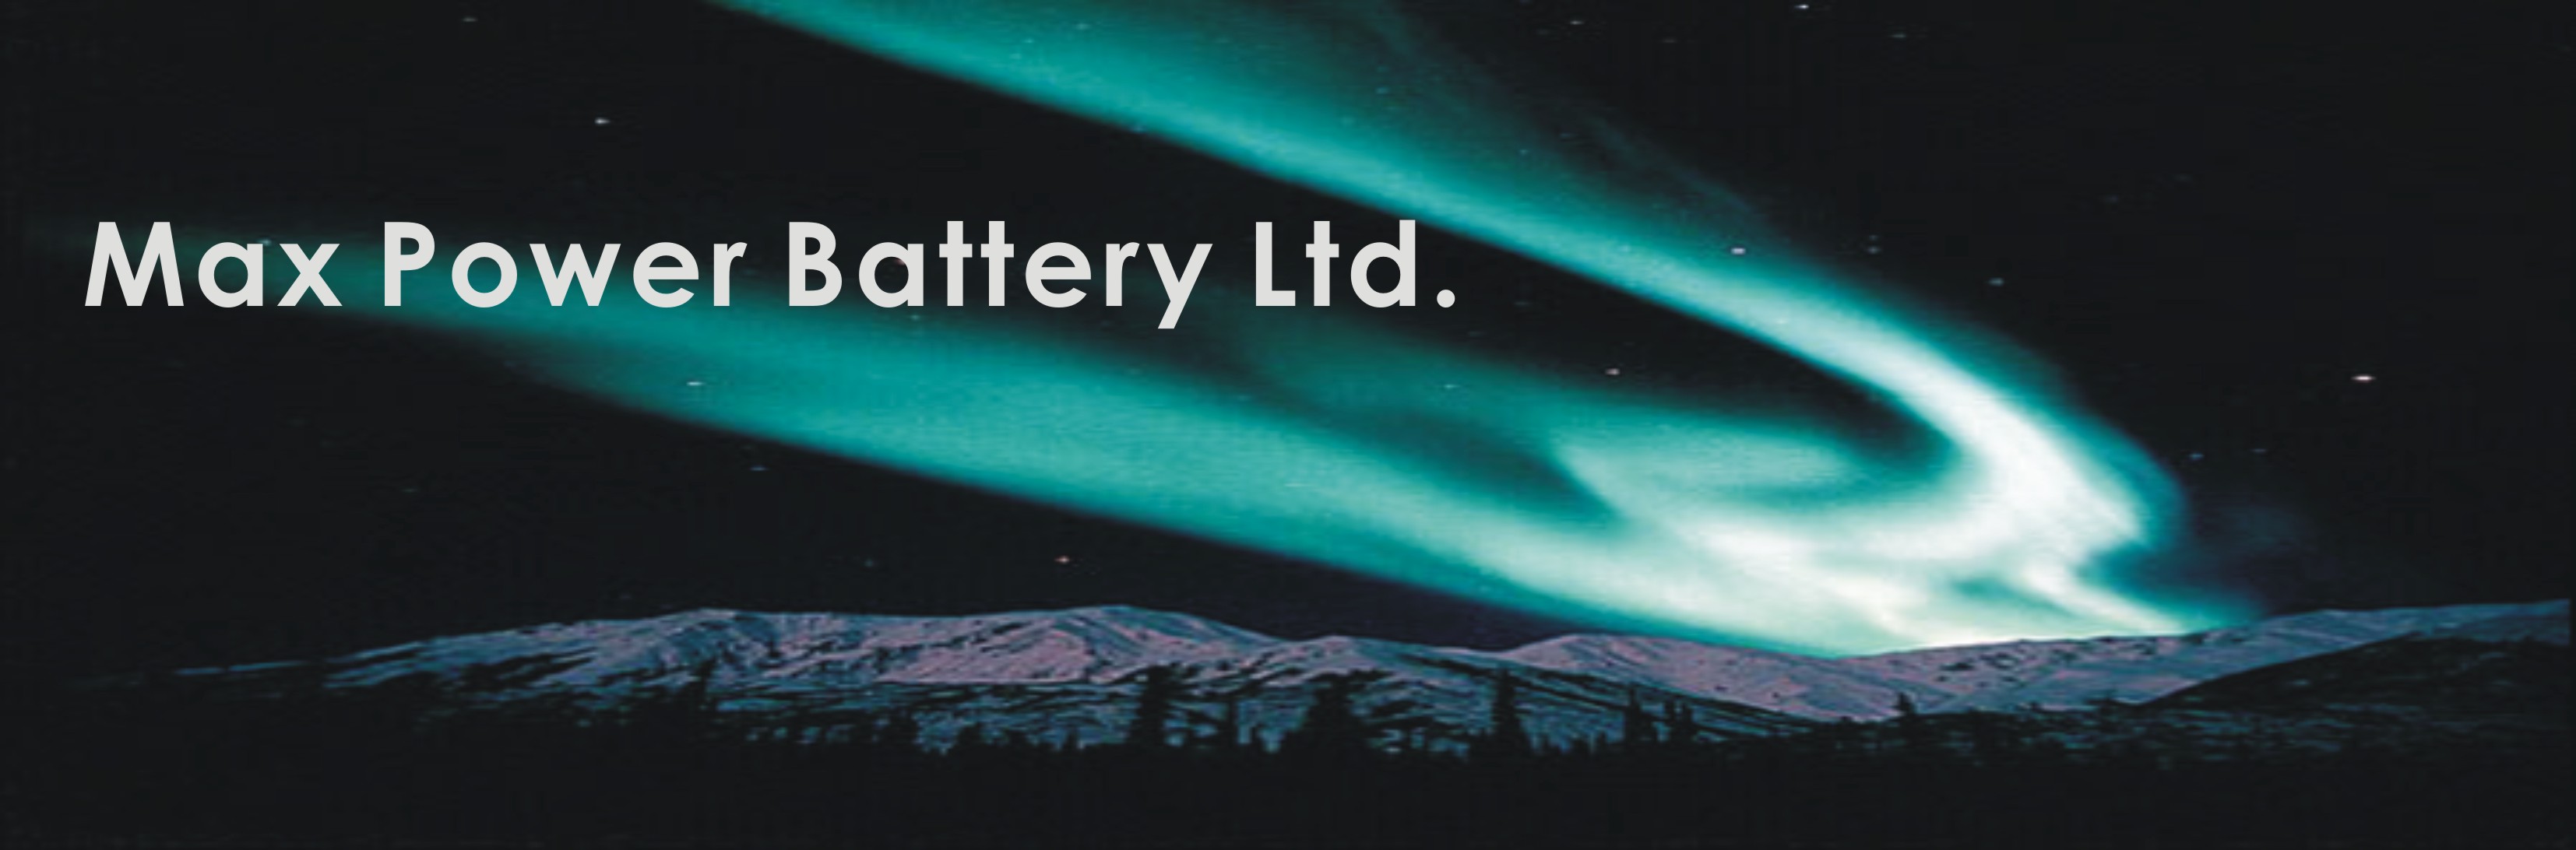 Max Power Battery Ltd. - specialized high technology of rechargeable batteries